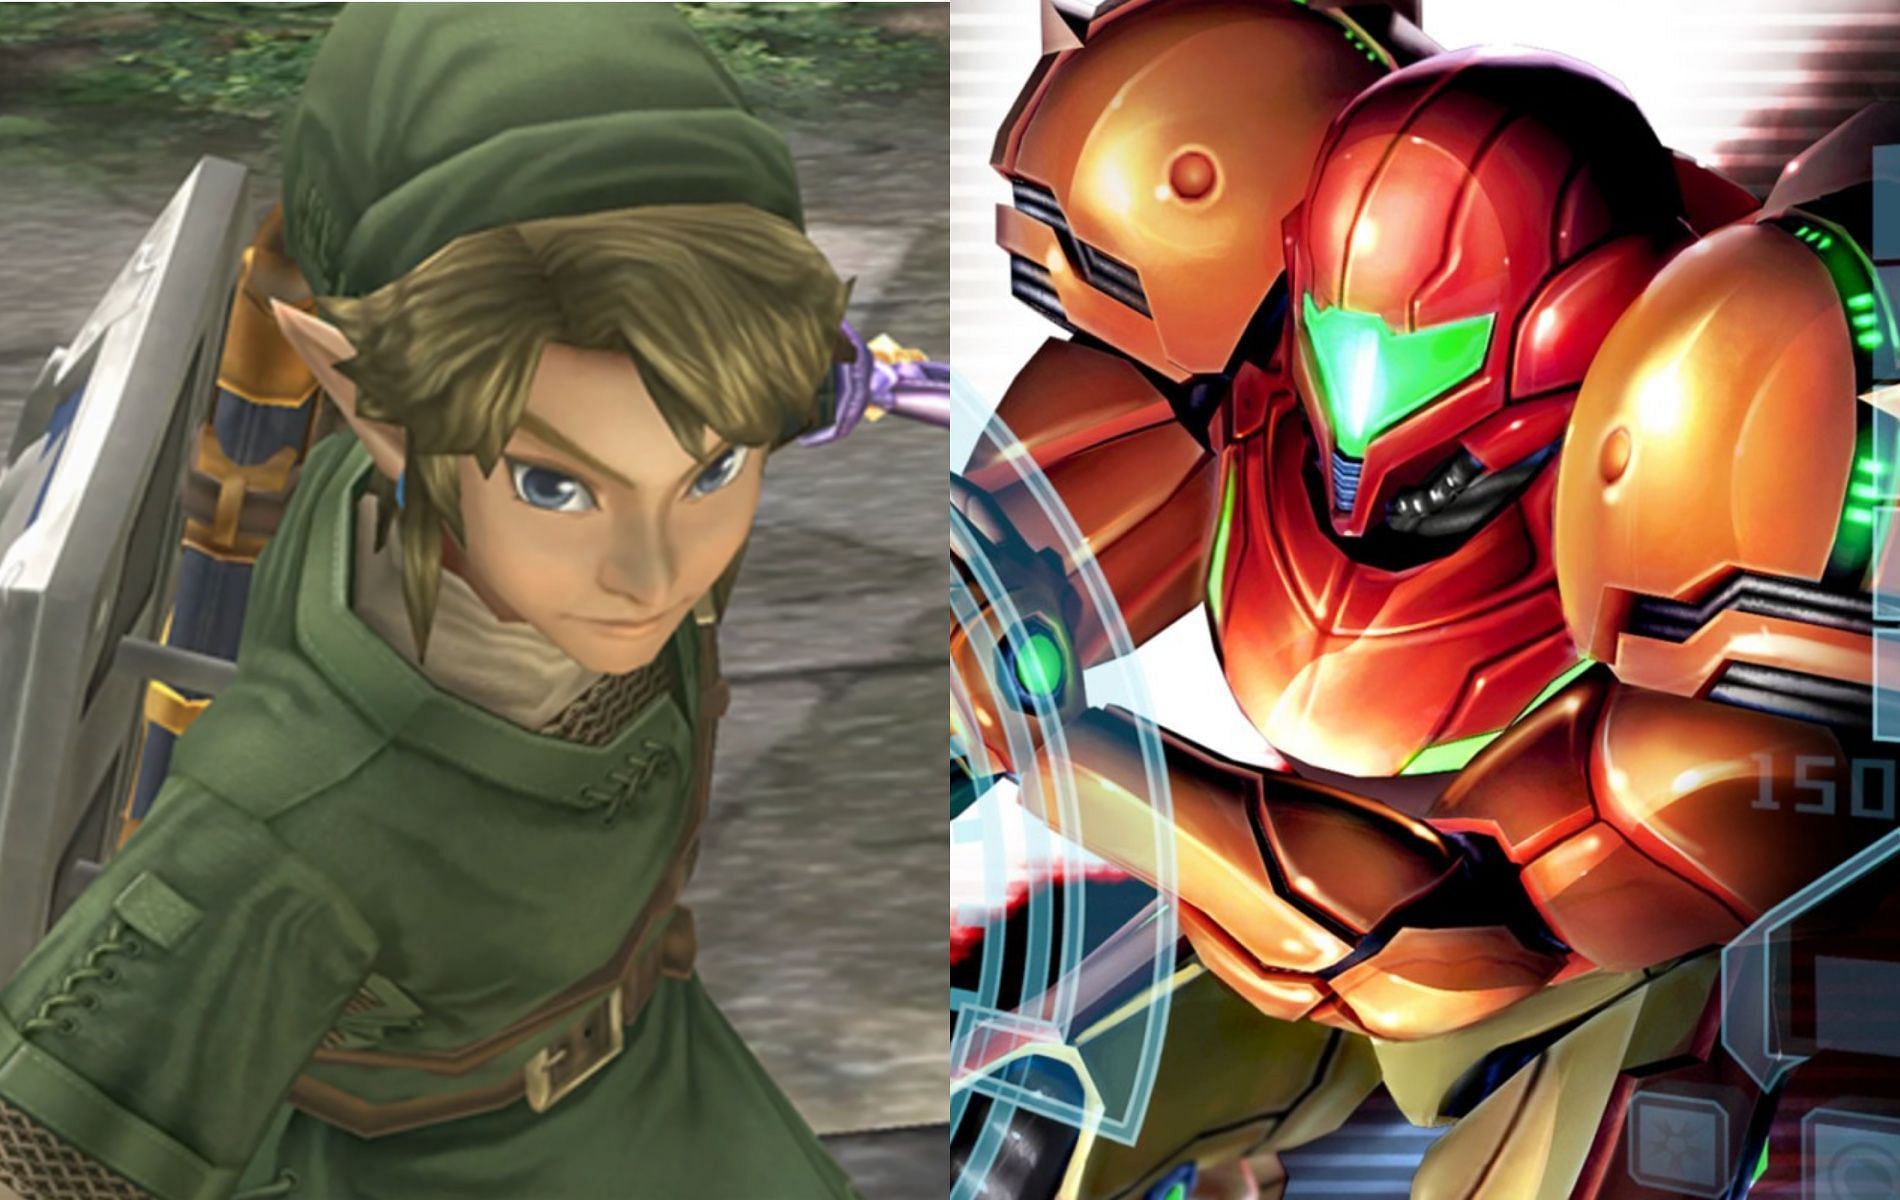 Official screenshot and cover art for The Legend of Zelda: Twilight Princess HD and Metroid Prime 2: Echoes respectively